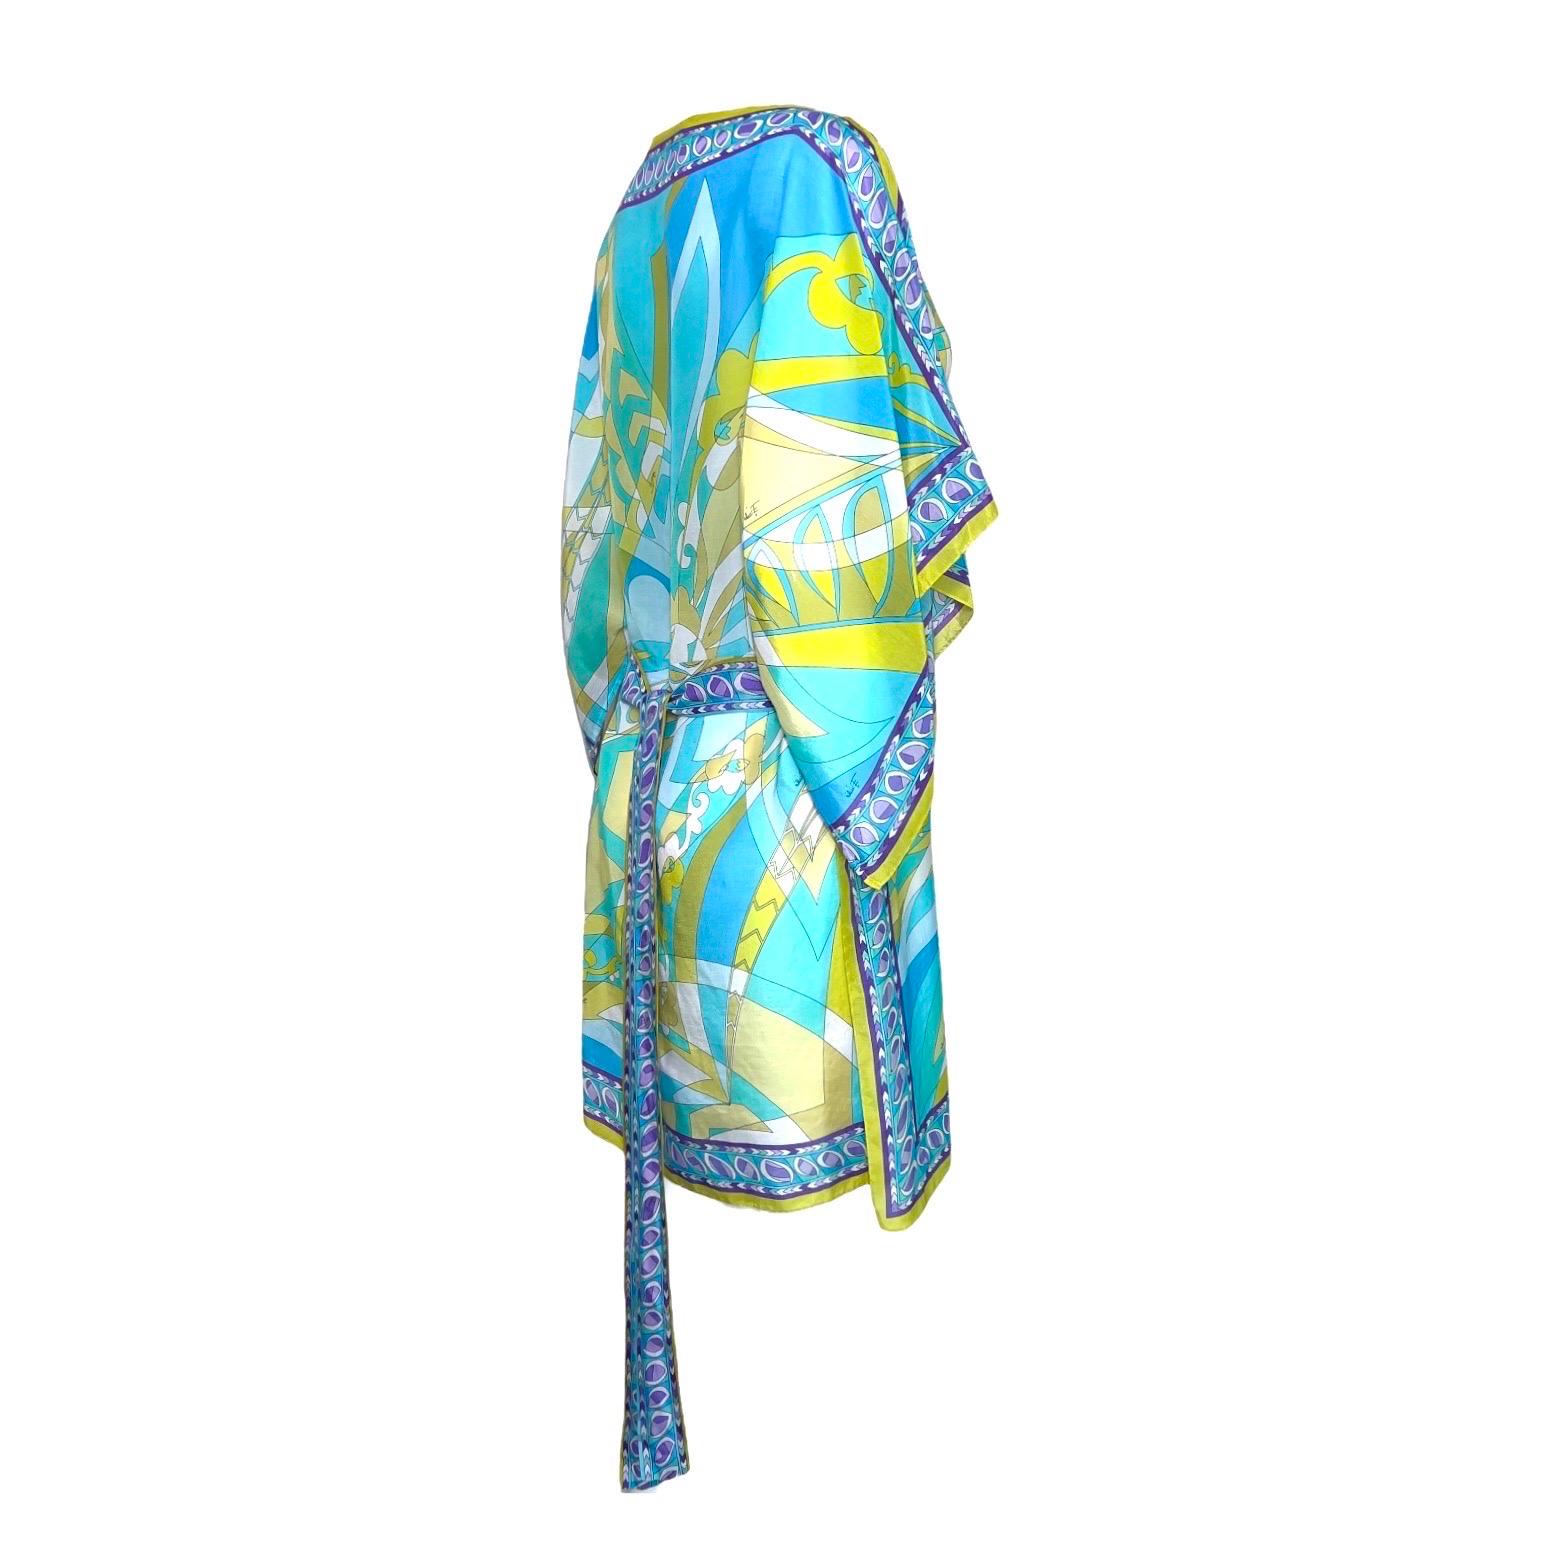 Beautiful EMILIO PUCCI dress
Signature piece with the timeless EMILIO PUCCI print in stunning colors
Made of finest demi-sheer silky voile fabric
